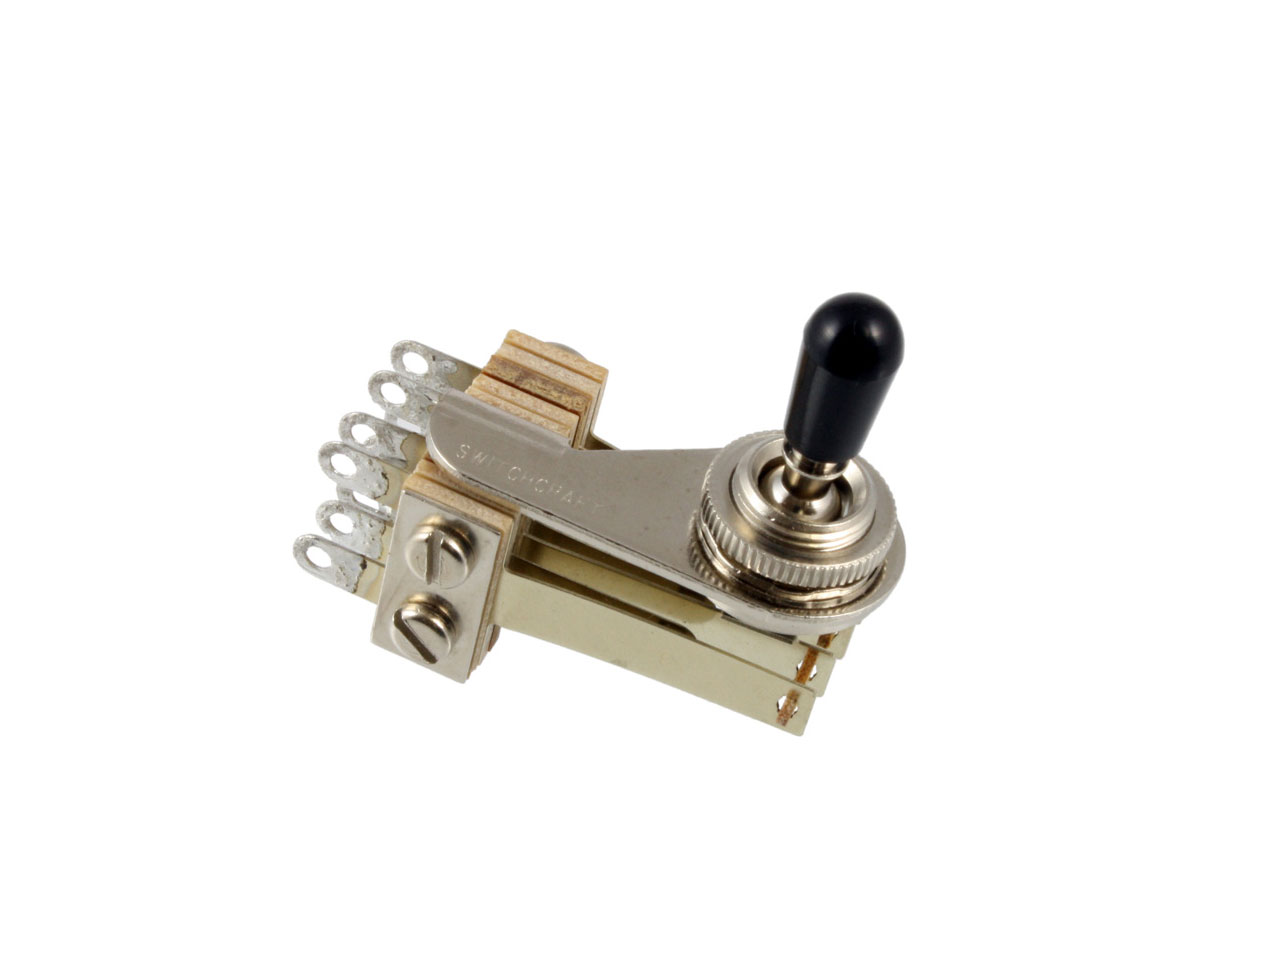 Allparts(オールパーツ) EP-4378-000 / Switchcraft Right Angle Double neck Toggle Switch (トグルスイッチ)